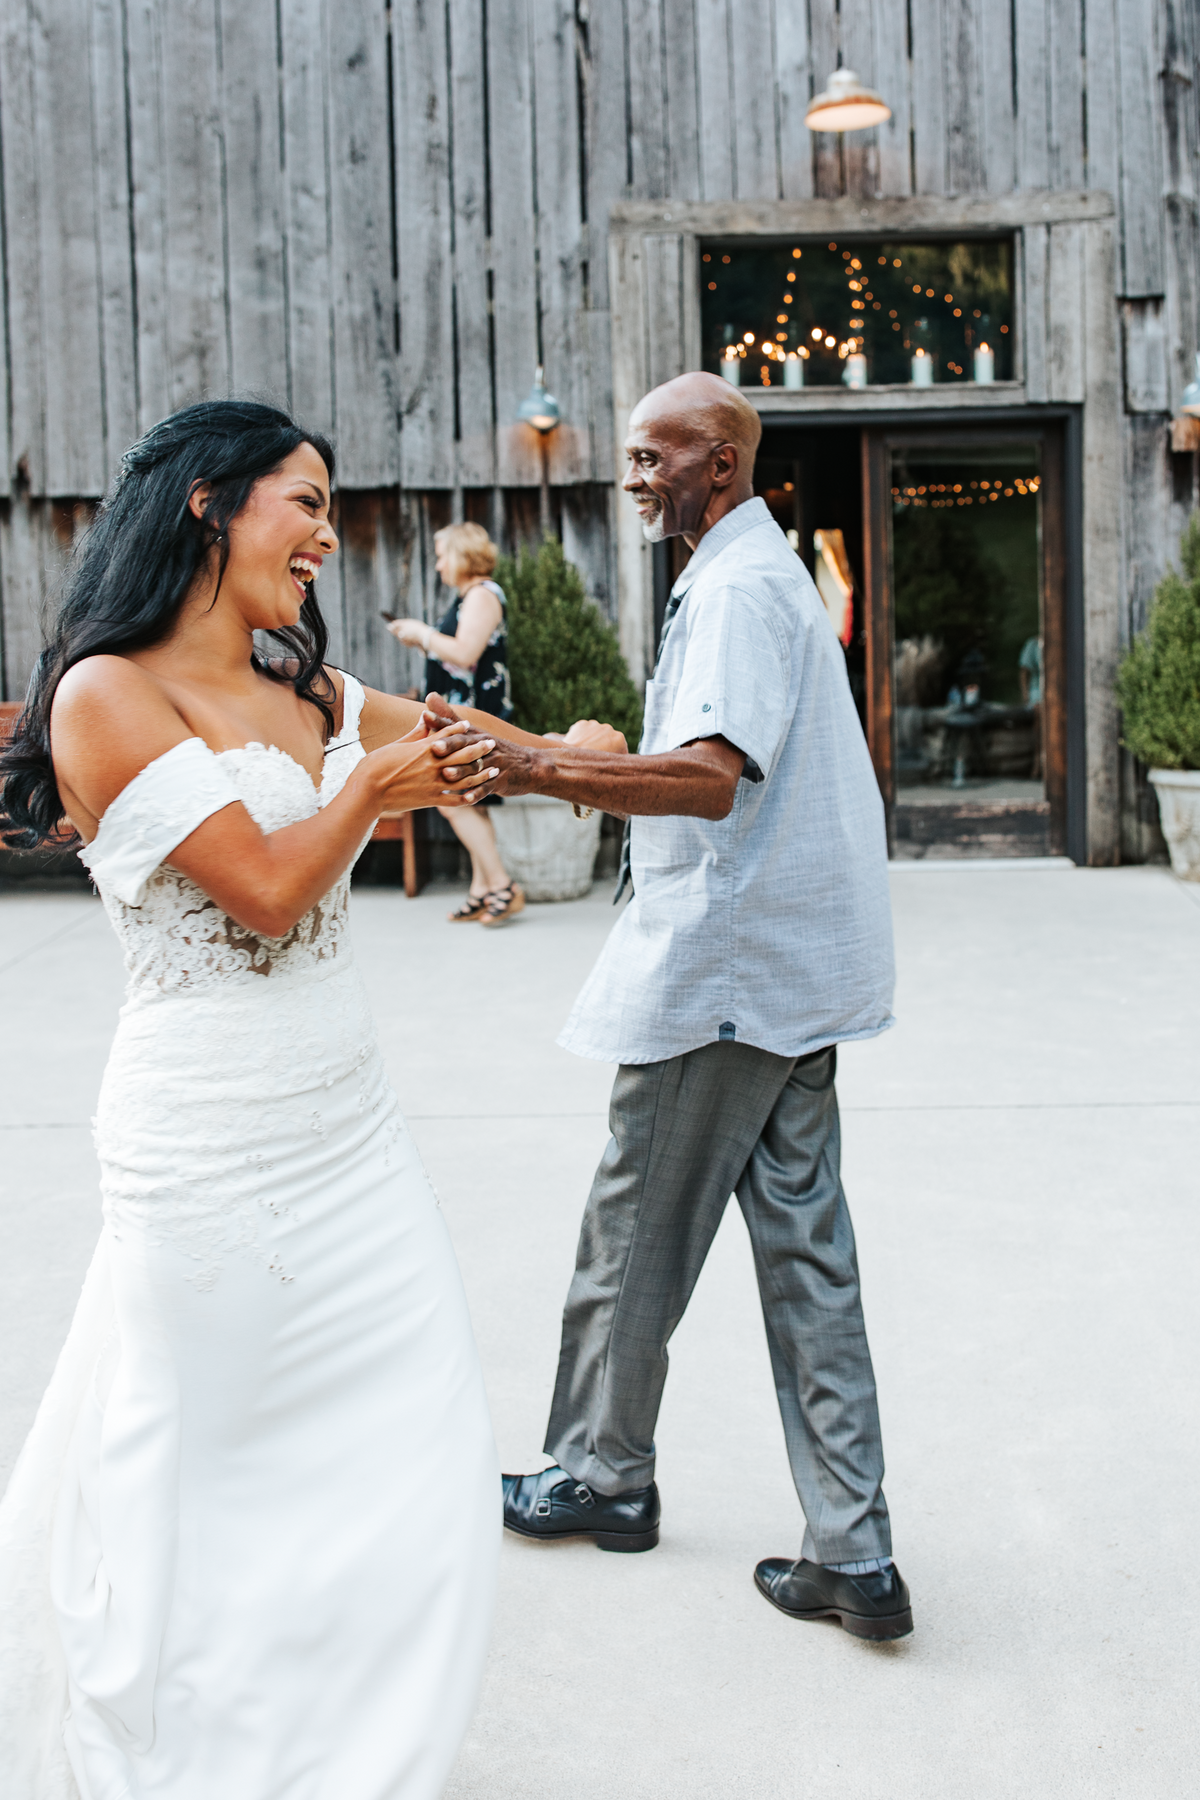 The Barn at Chestnut Springs Wedding | Carly Crawford Photography | Knoxville Wedding, Couple, and Portrait Photographer-312495